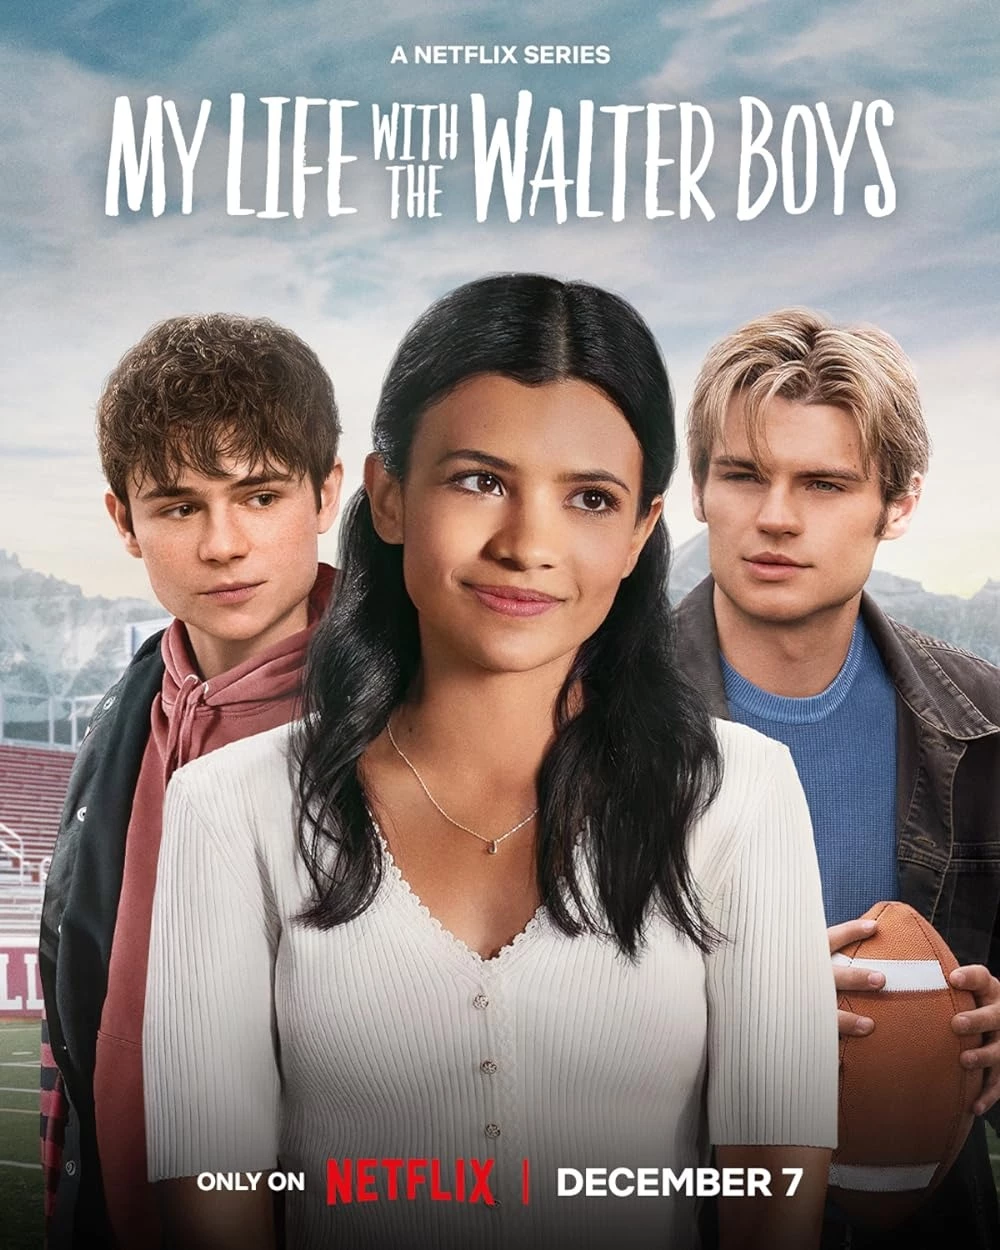 Details on “My Life With The Walter Boys”